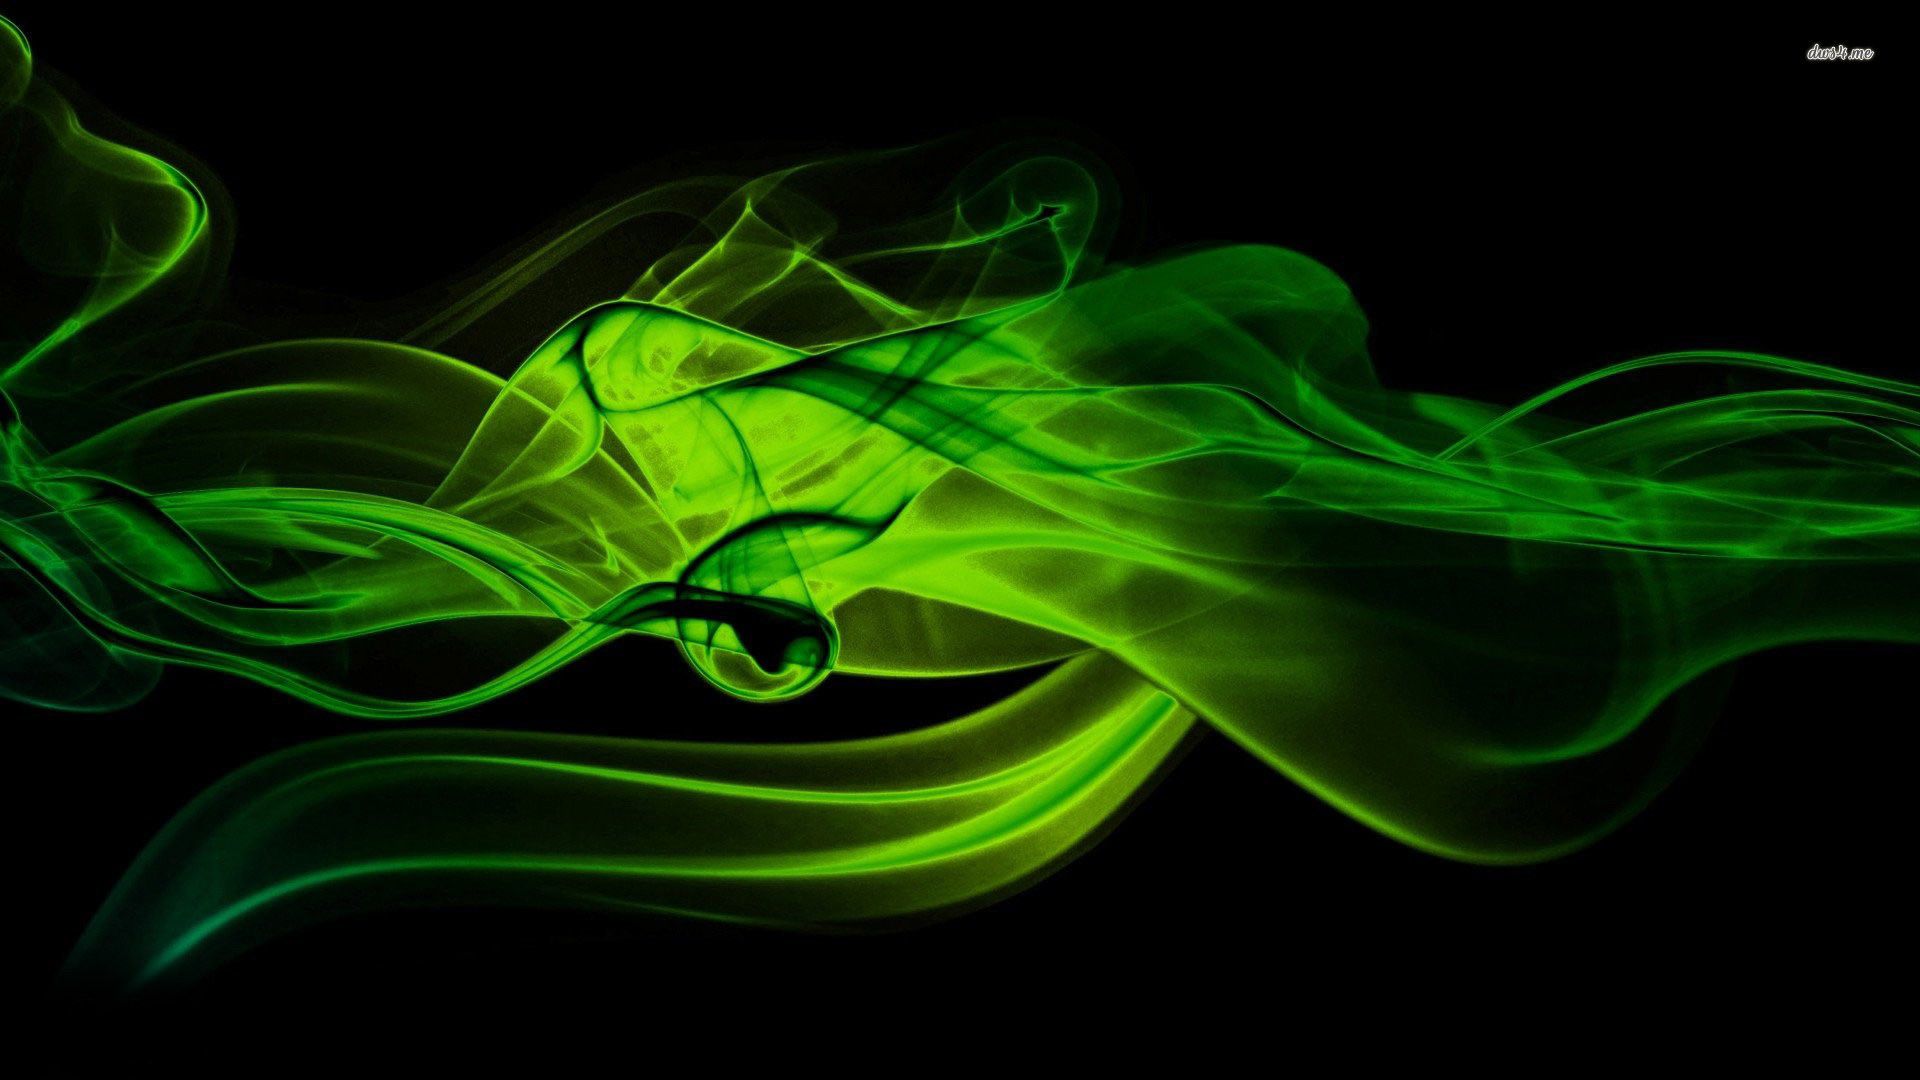 Mobile wallpaper Clot Shroud Abstract Smoke 128122 download the  picture for free